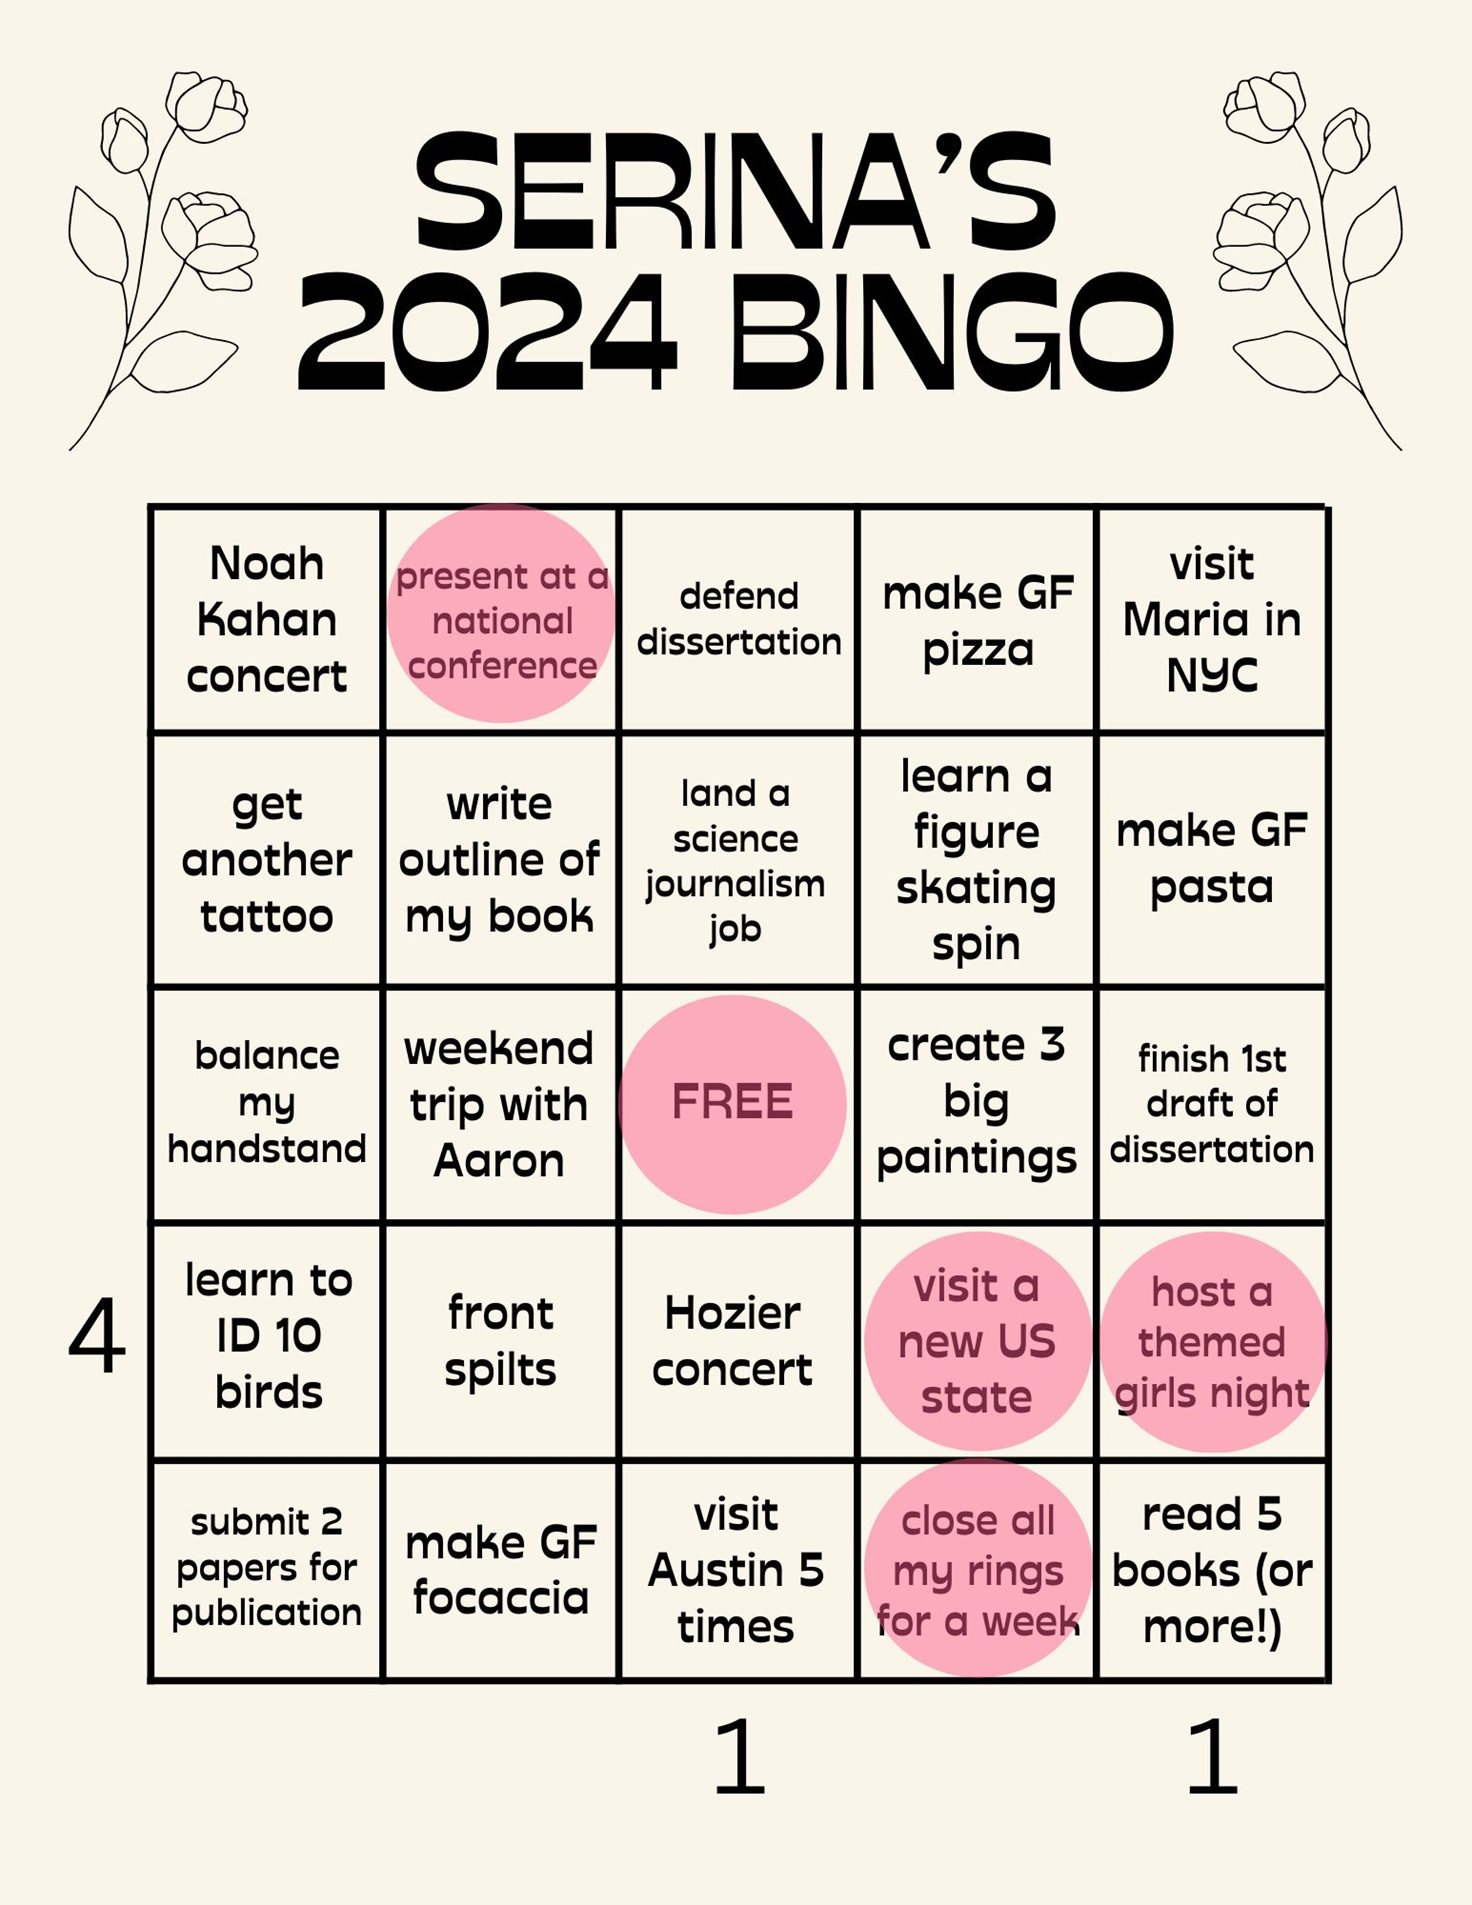 Making the most of 2024: How to make your 2024 Bingo teaser image